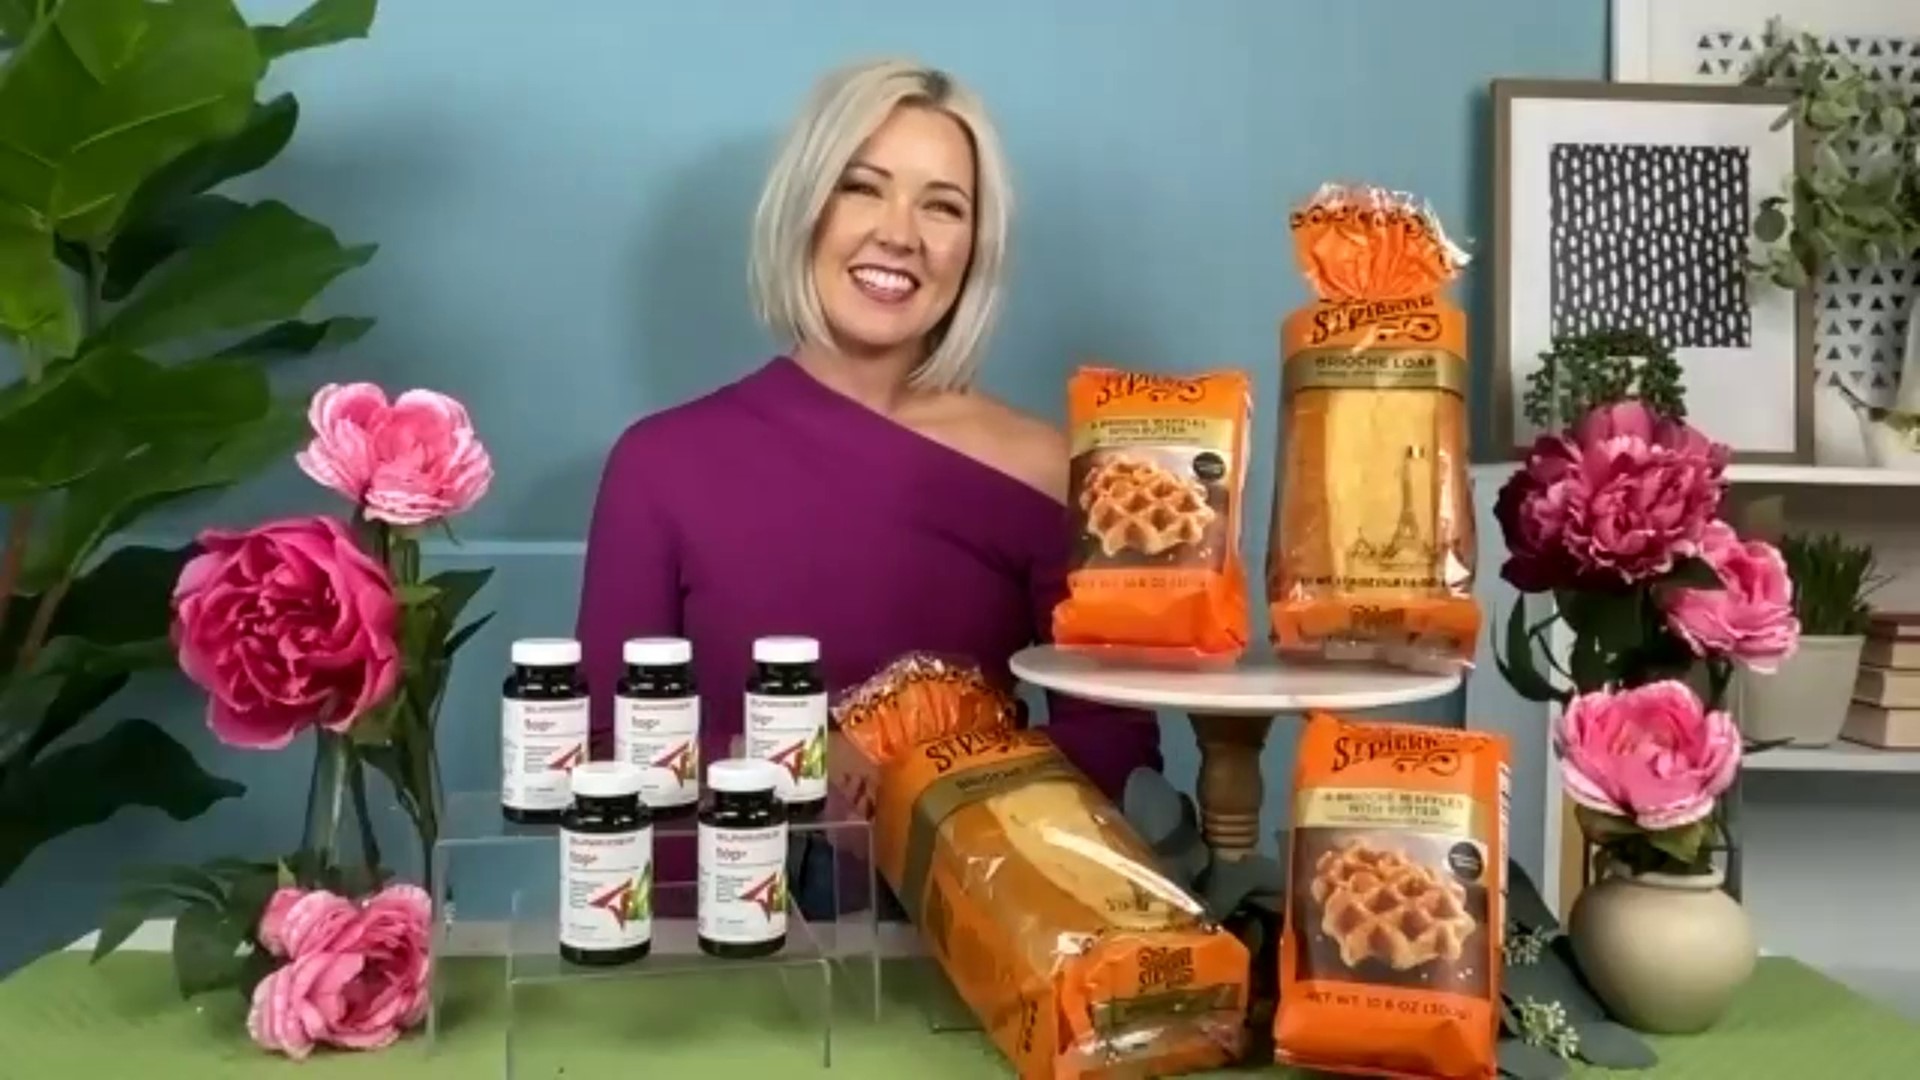 Sunrider Top supplements and St. Pierre brioche are two of Megan Thomas Head's current must haves. Sponsored by Bourbon Blonde Blog.